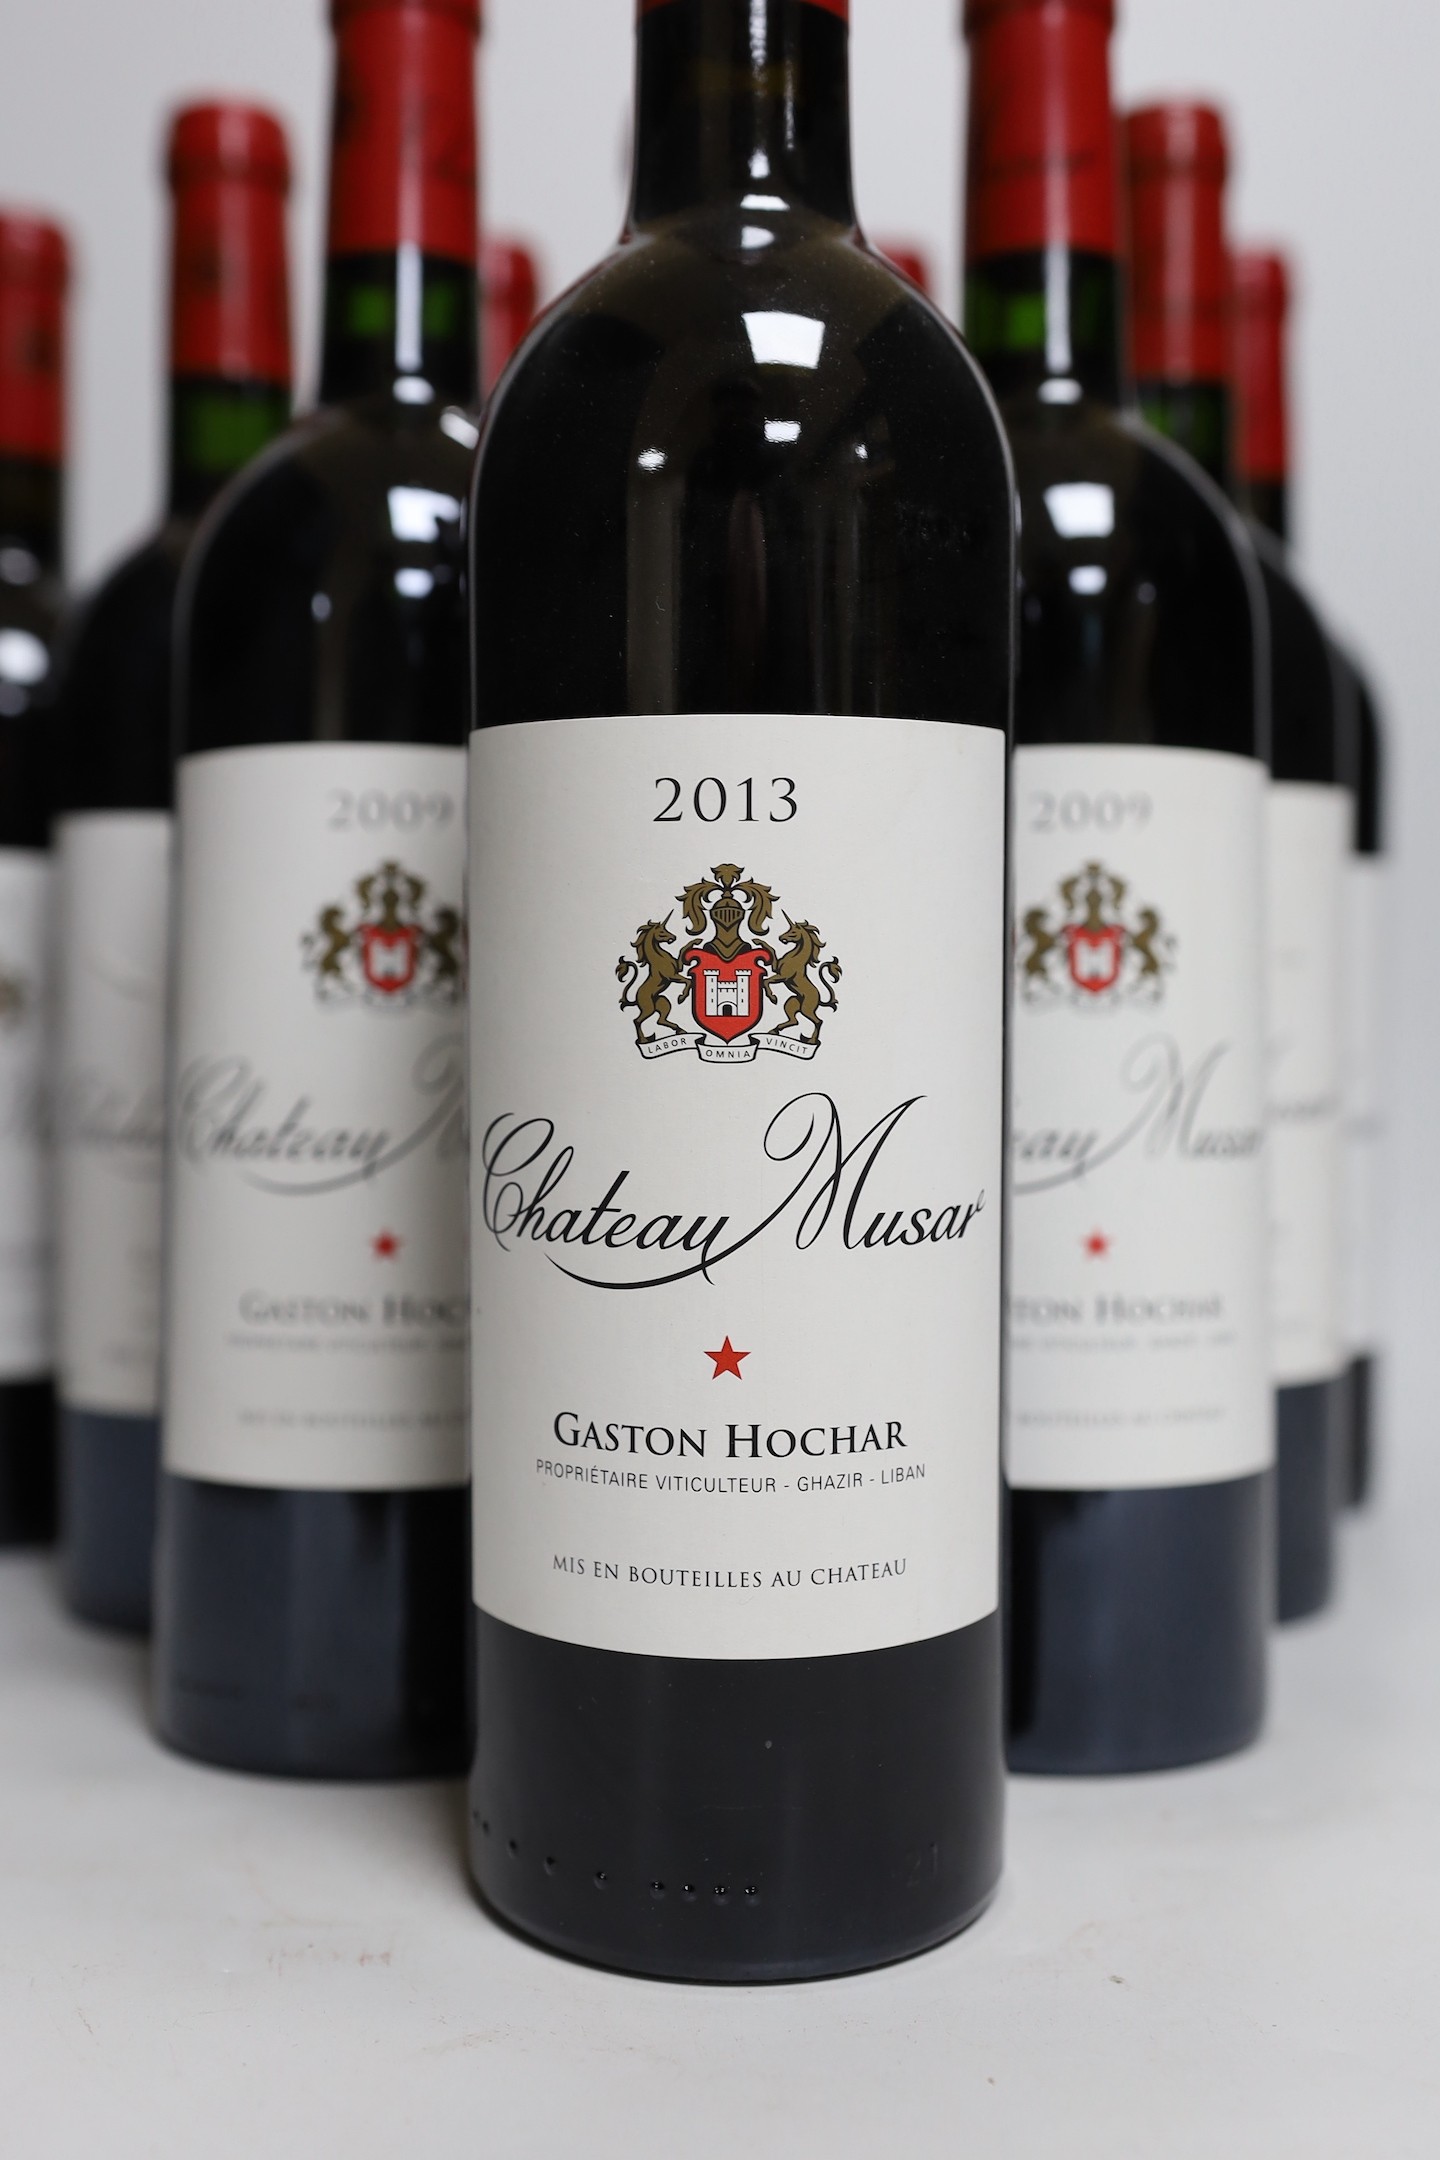 10 bottles of wine - 5 bottles of Chateau Musar 2013, 3 bottles of 2002 and 2 bottles of 2009